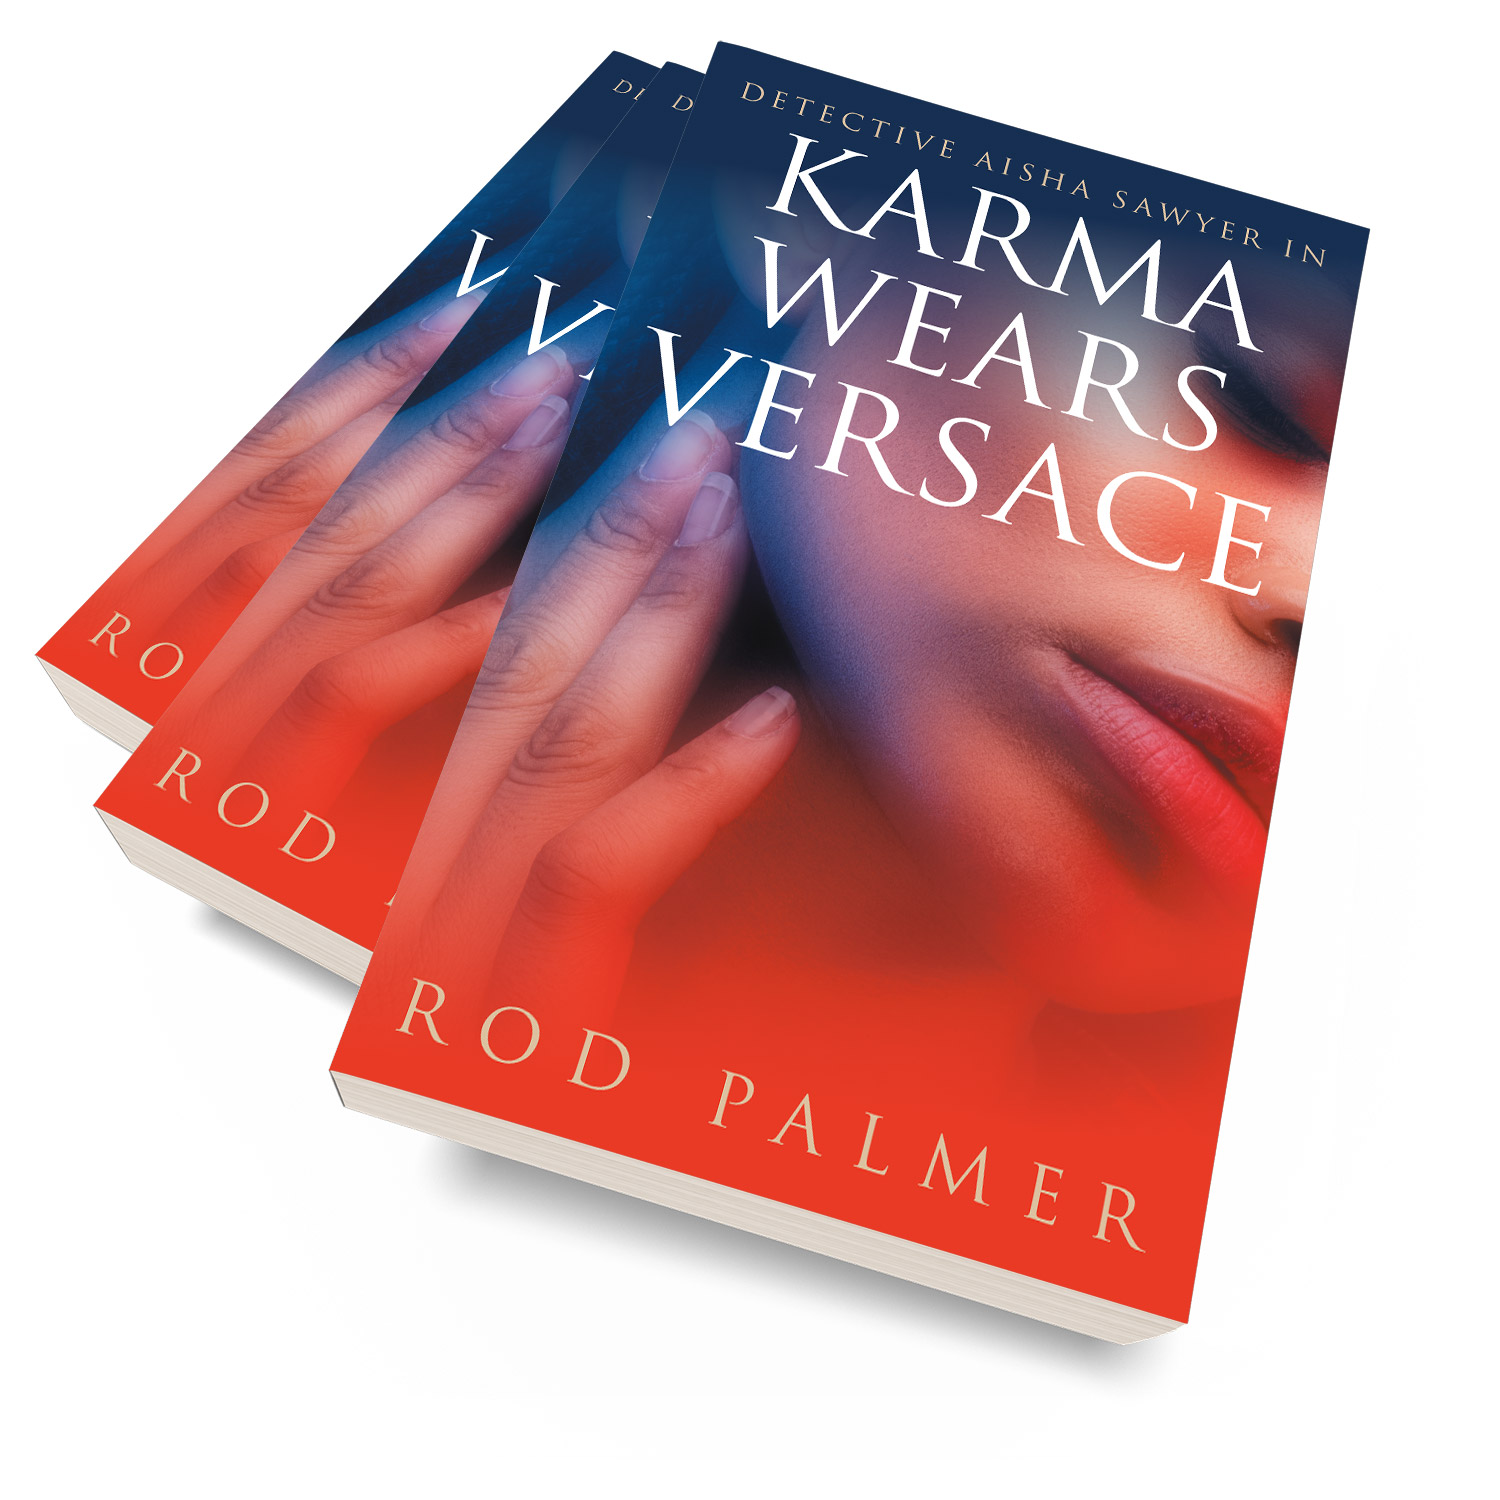 'Karma Wears Versace' is a steamy, female-led detective thriller, set in Atlanta. The author is Rod Palmer. The book cover design and interior formatting are by Mark Thomas. To learn more about what Mark could do for your book, please visit coverness.com.